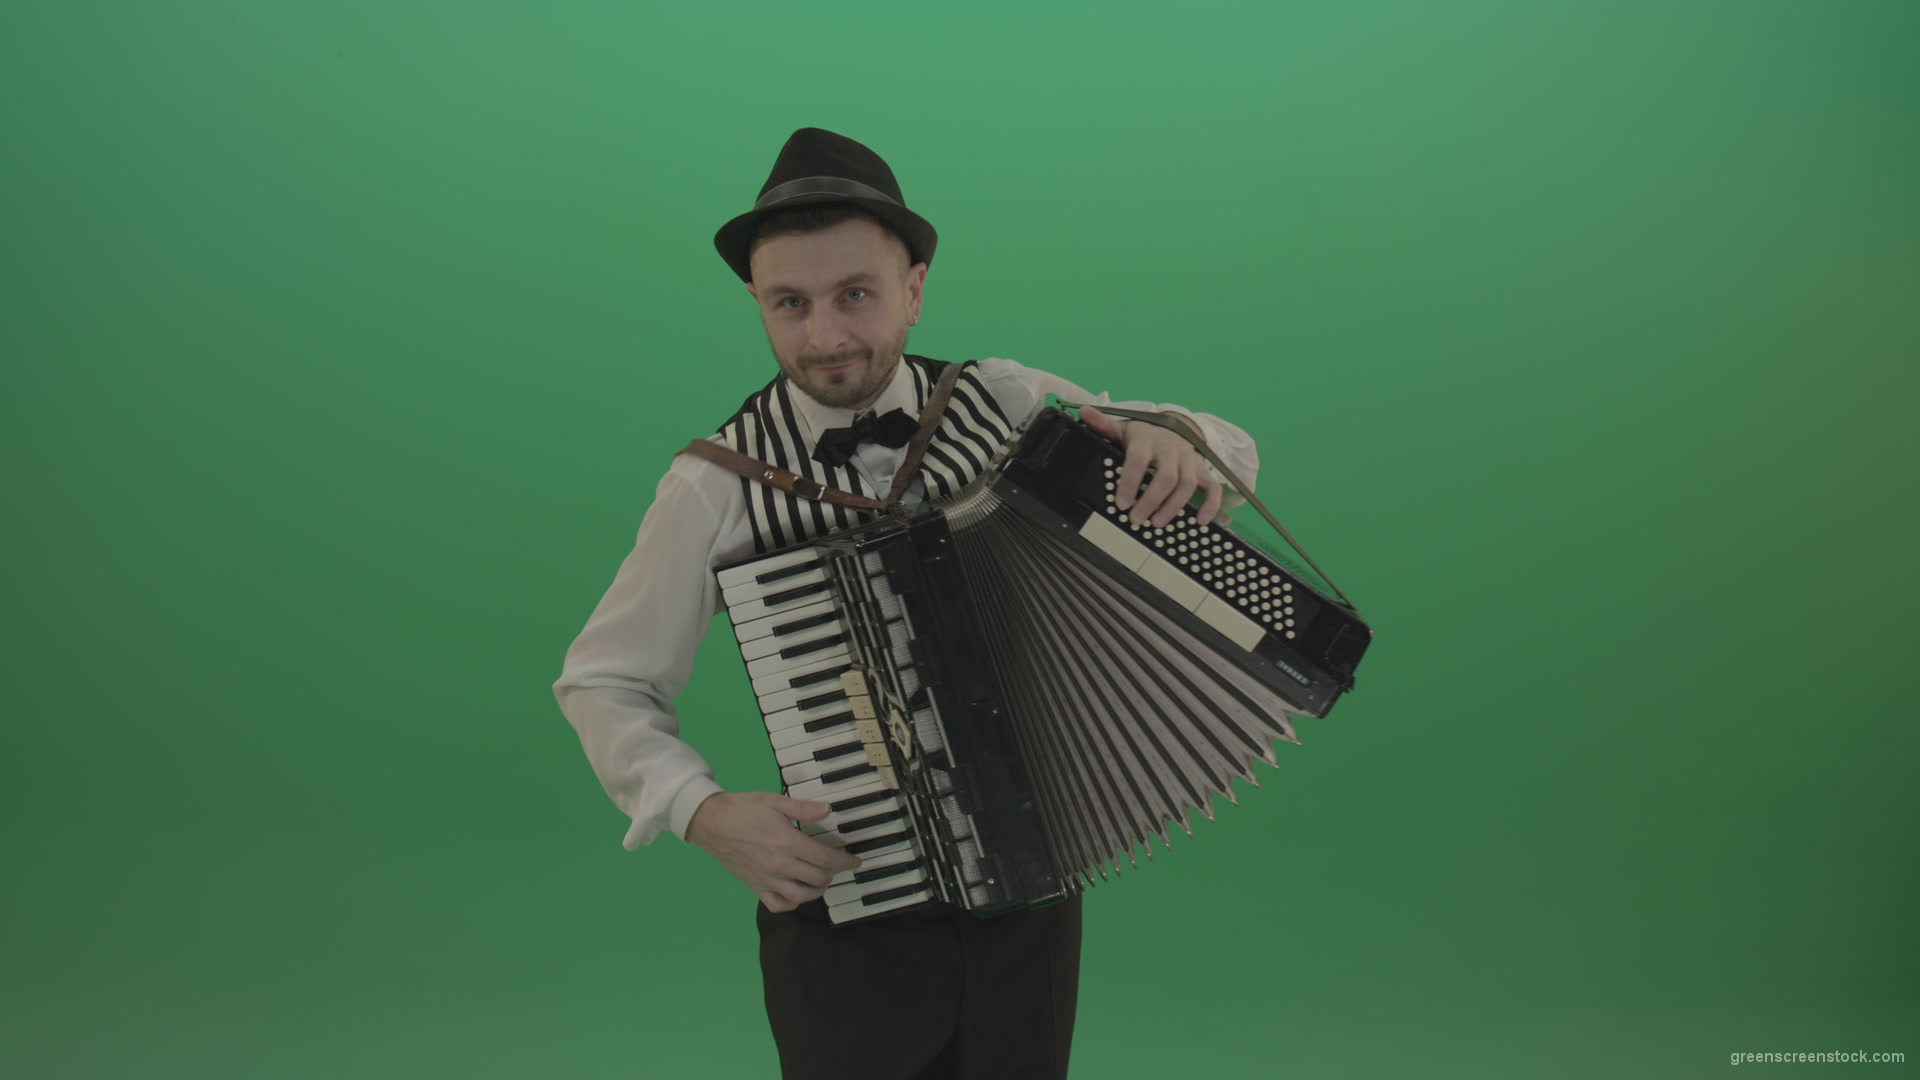 Virtuoso-player-man-with-Accordion-isolated-on-green-screen-in-front-view-1_006 Green Screen Stock